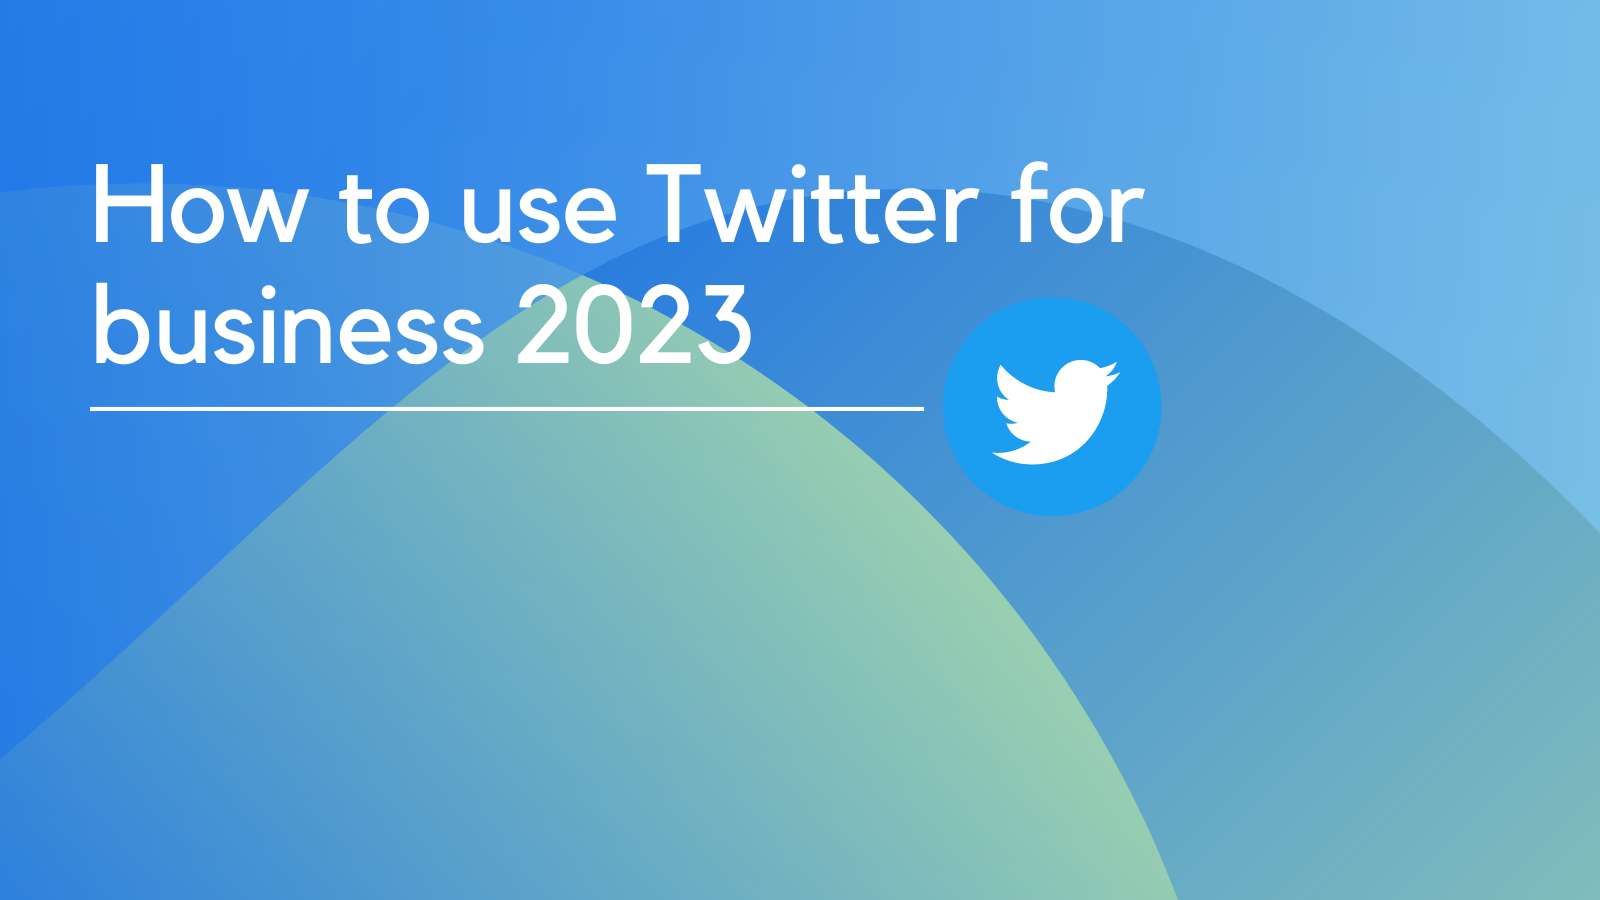 How to use twitter in 2023